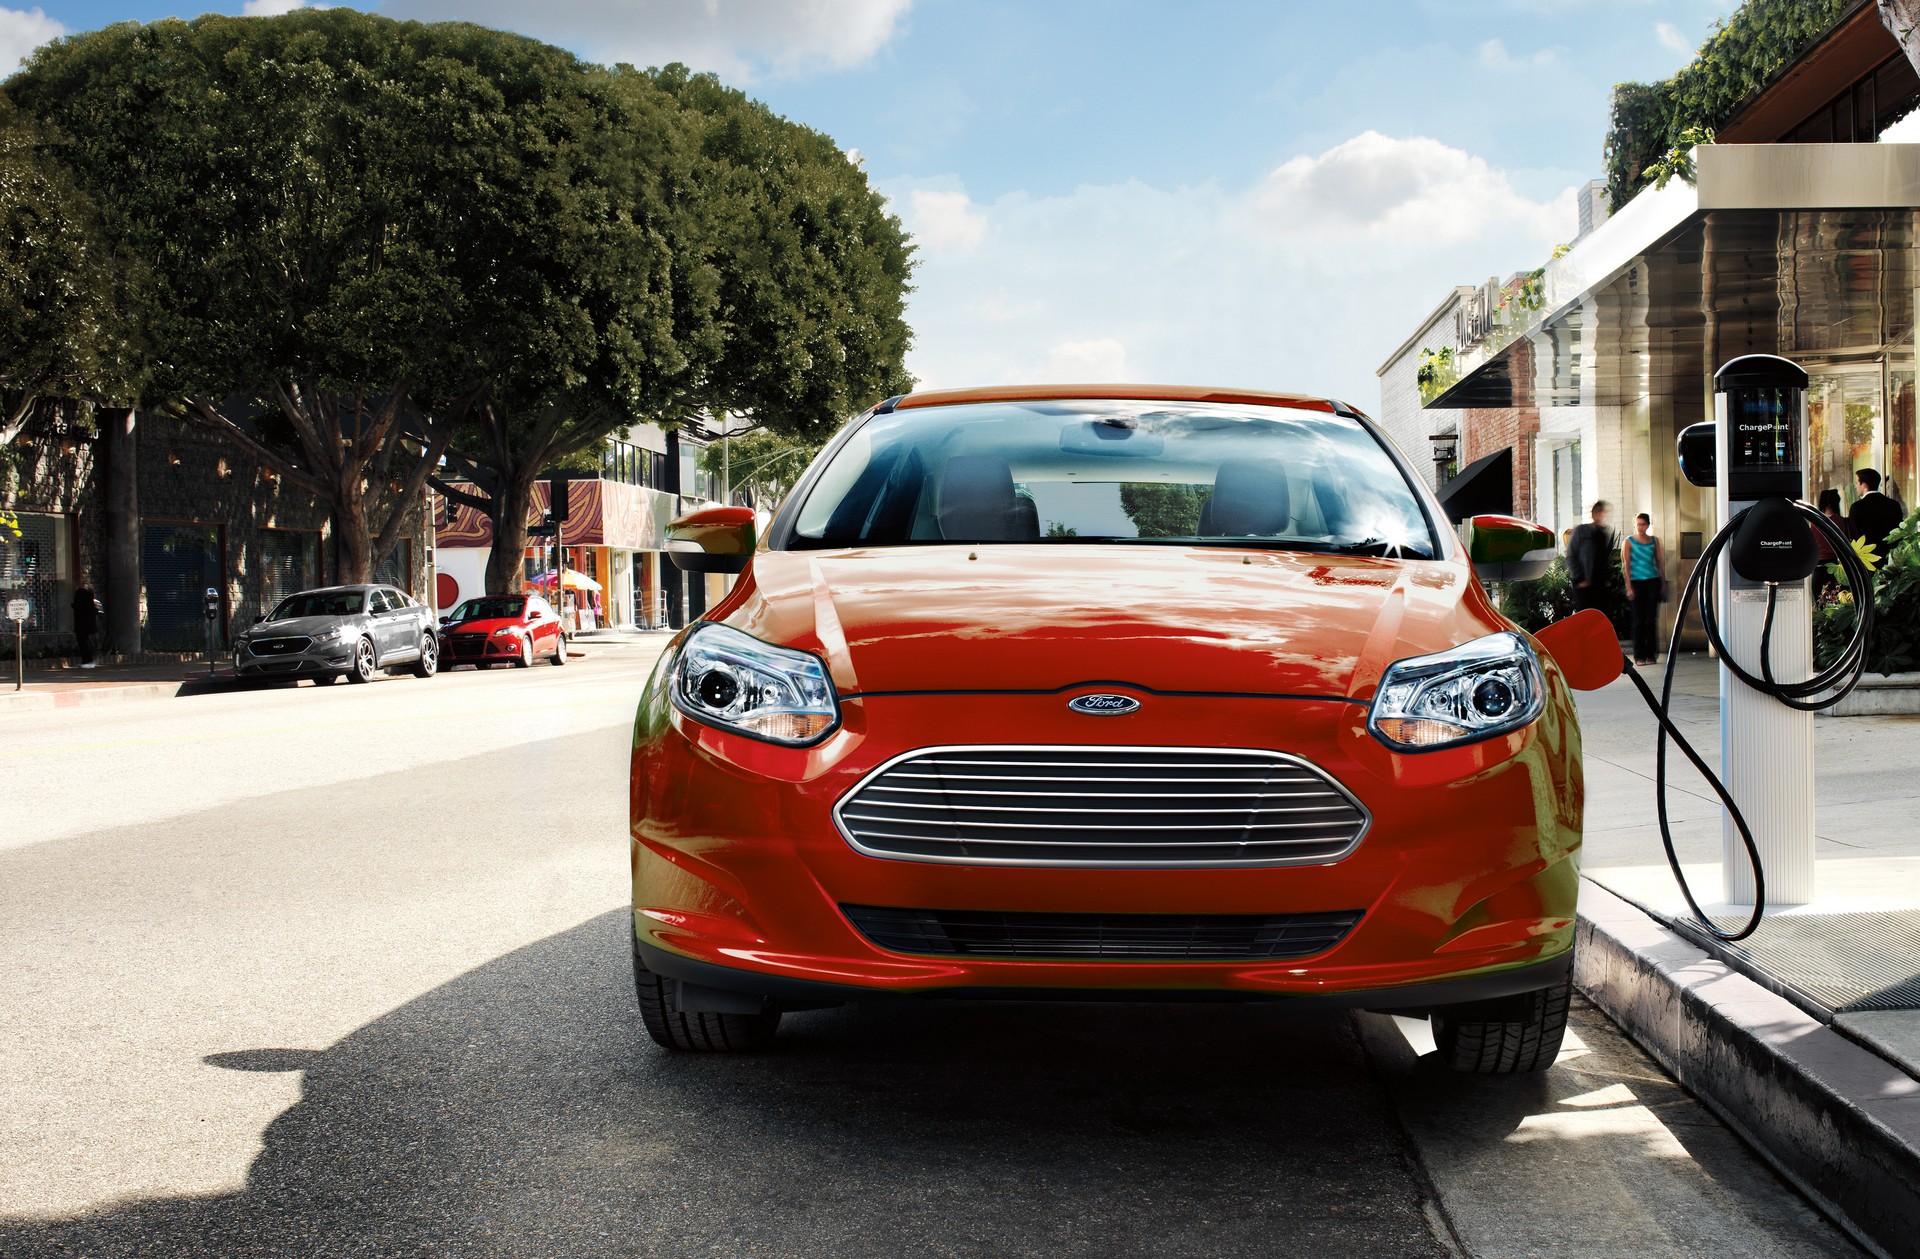 Ford Electrification Boss Calls The Focus Electric A Compliance Car That's  “Not Too Exciting” | Carscoops